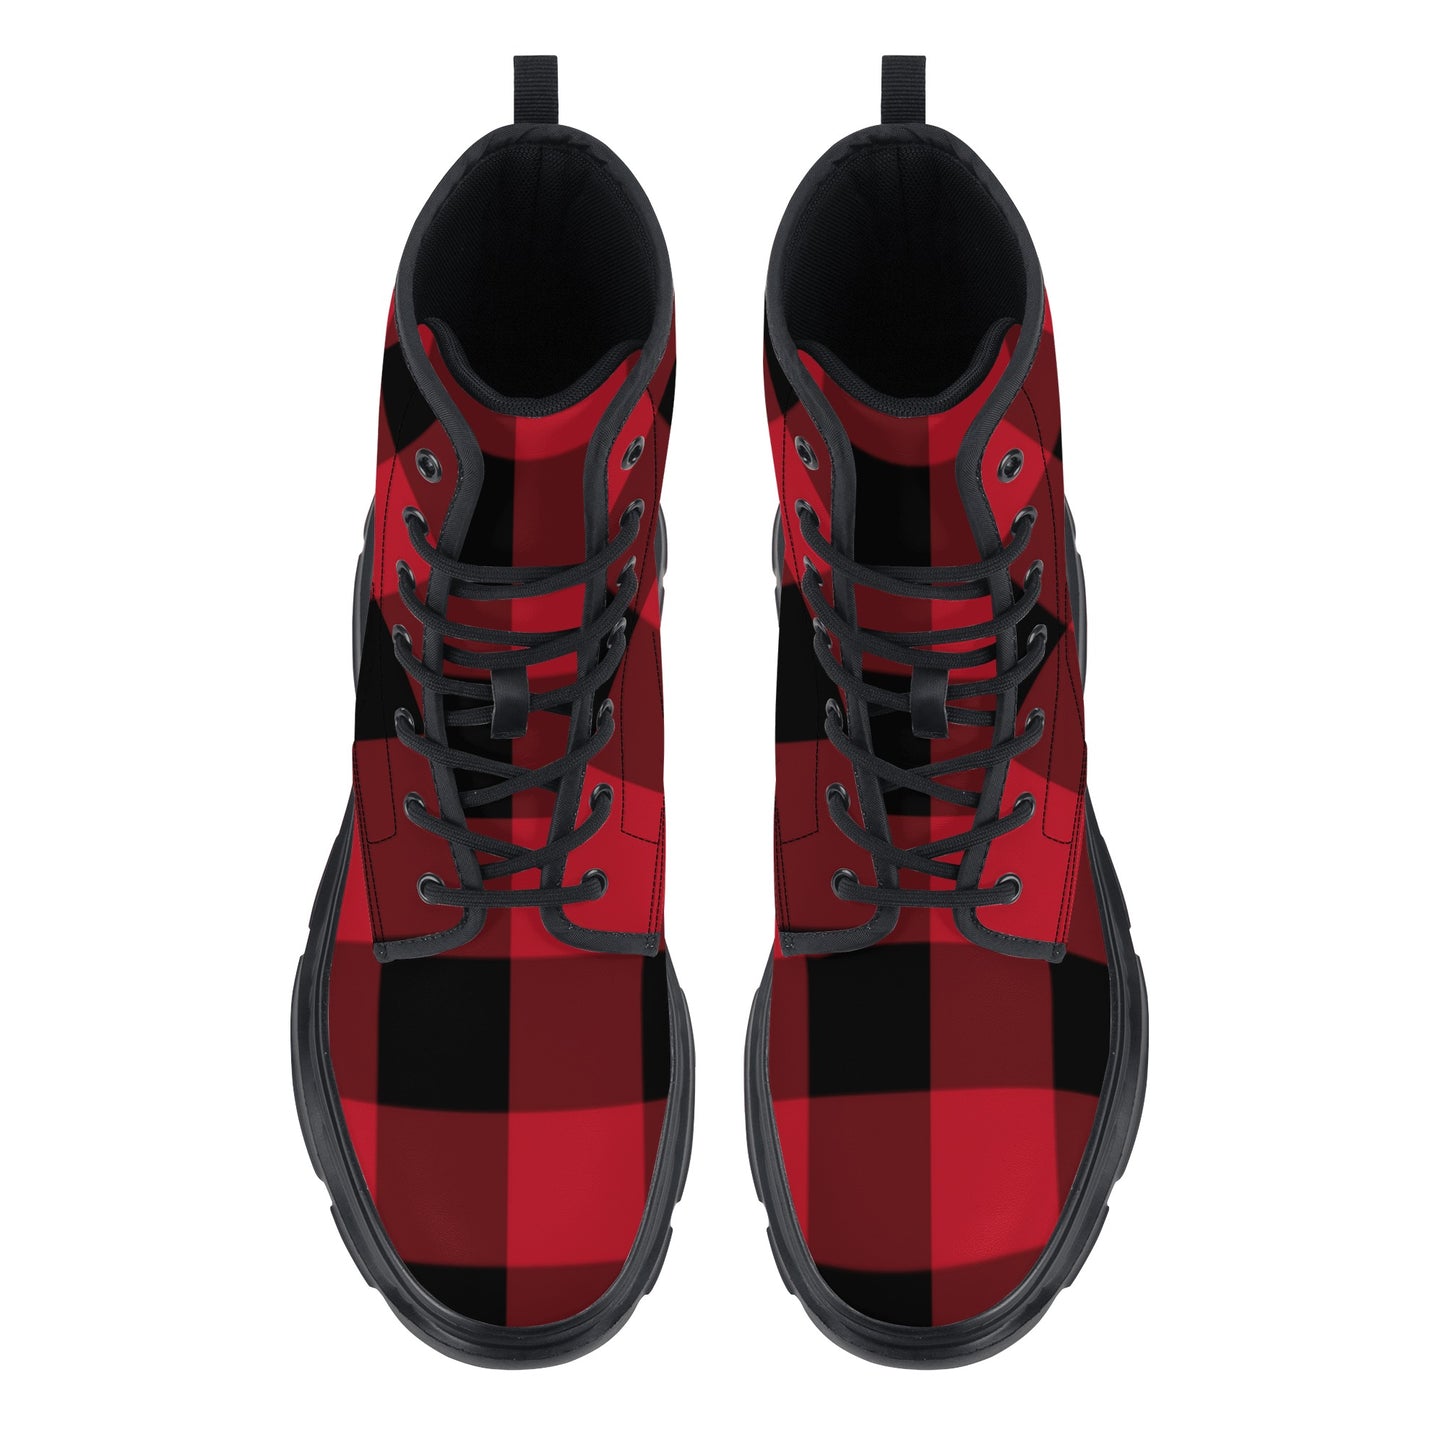 Red and Black Buffalo Plaid Men Leather Chunky Boots, Check Lace Up Shoes Hiking Festival Vegan Ankle Combat Work Winter Custom Starcove Fashion